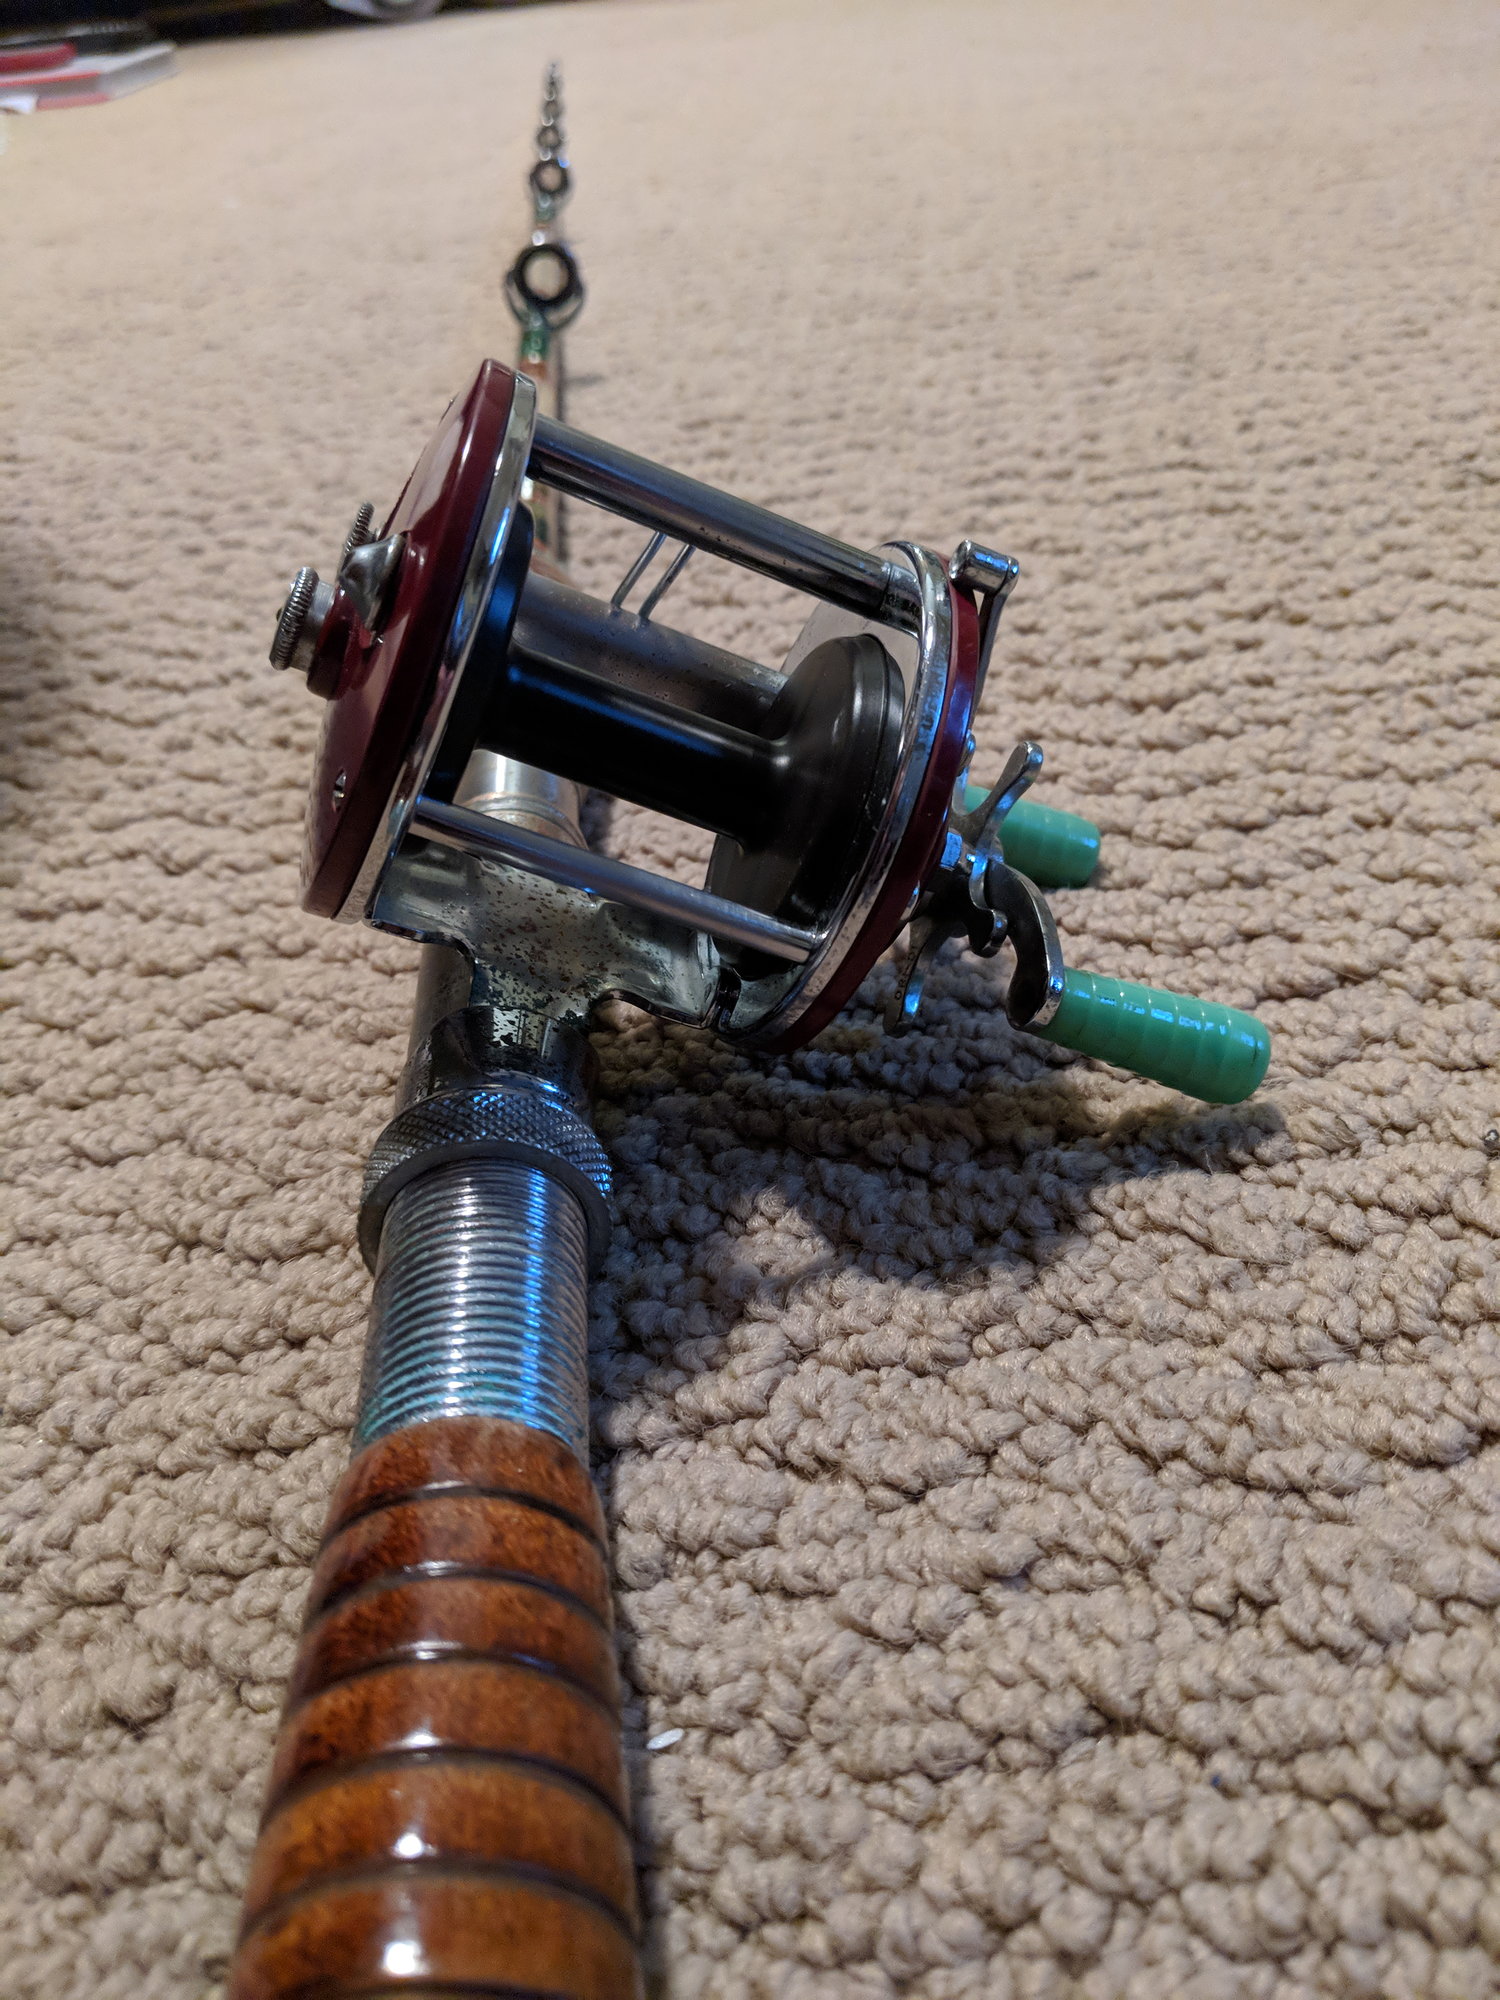 Can anyone help me ID this (possibly vintage) fishing rod? The